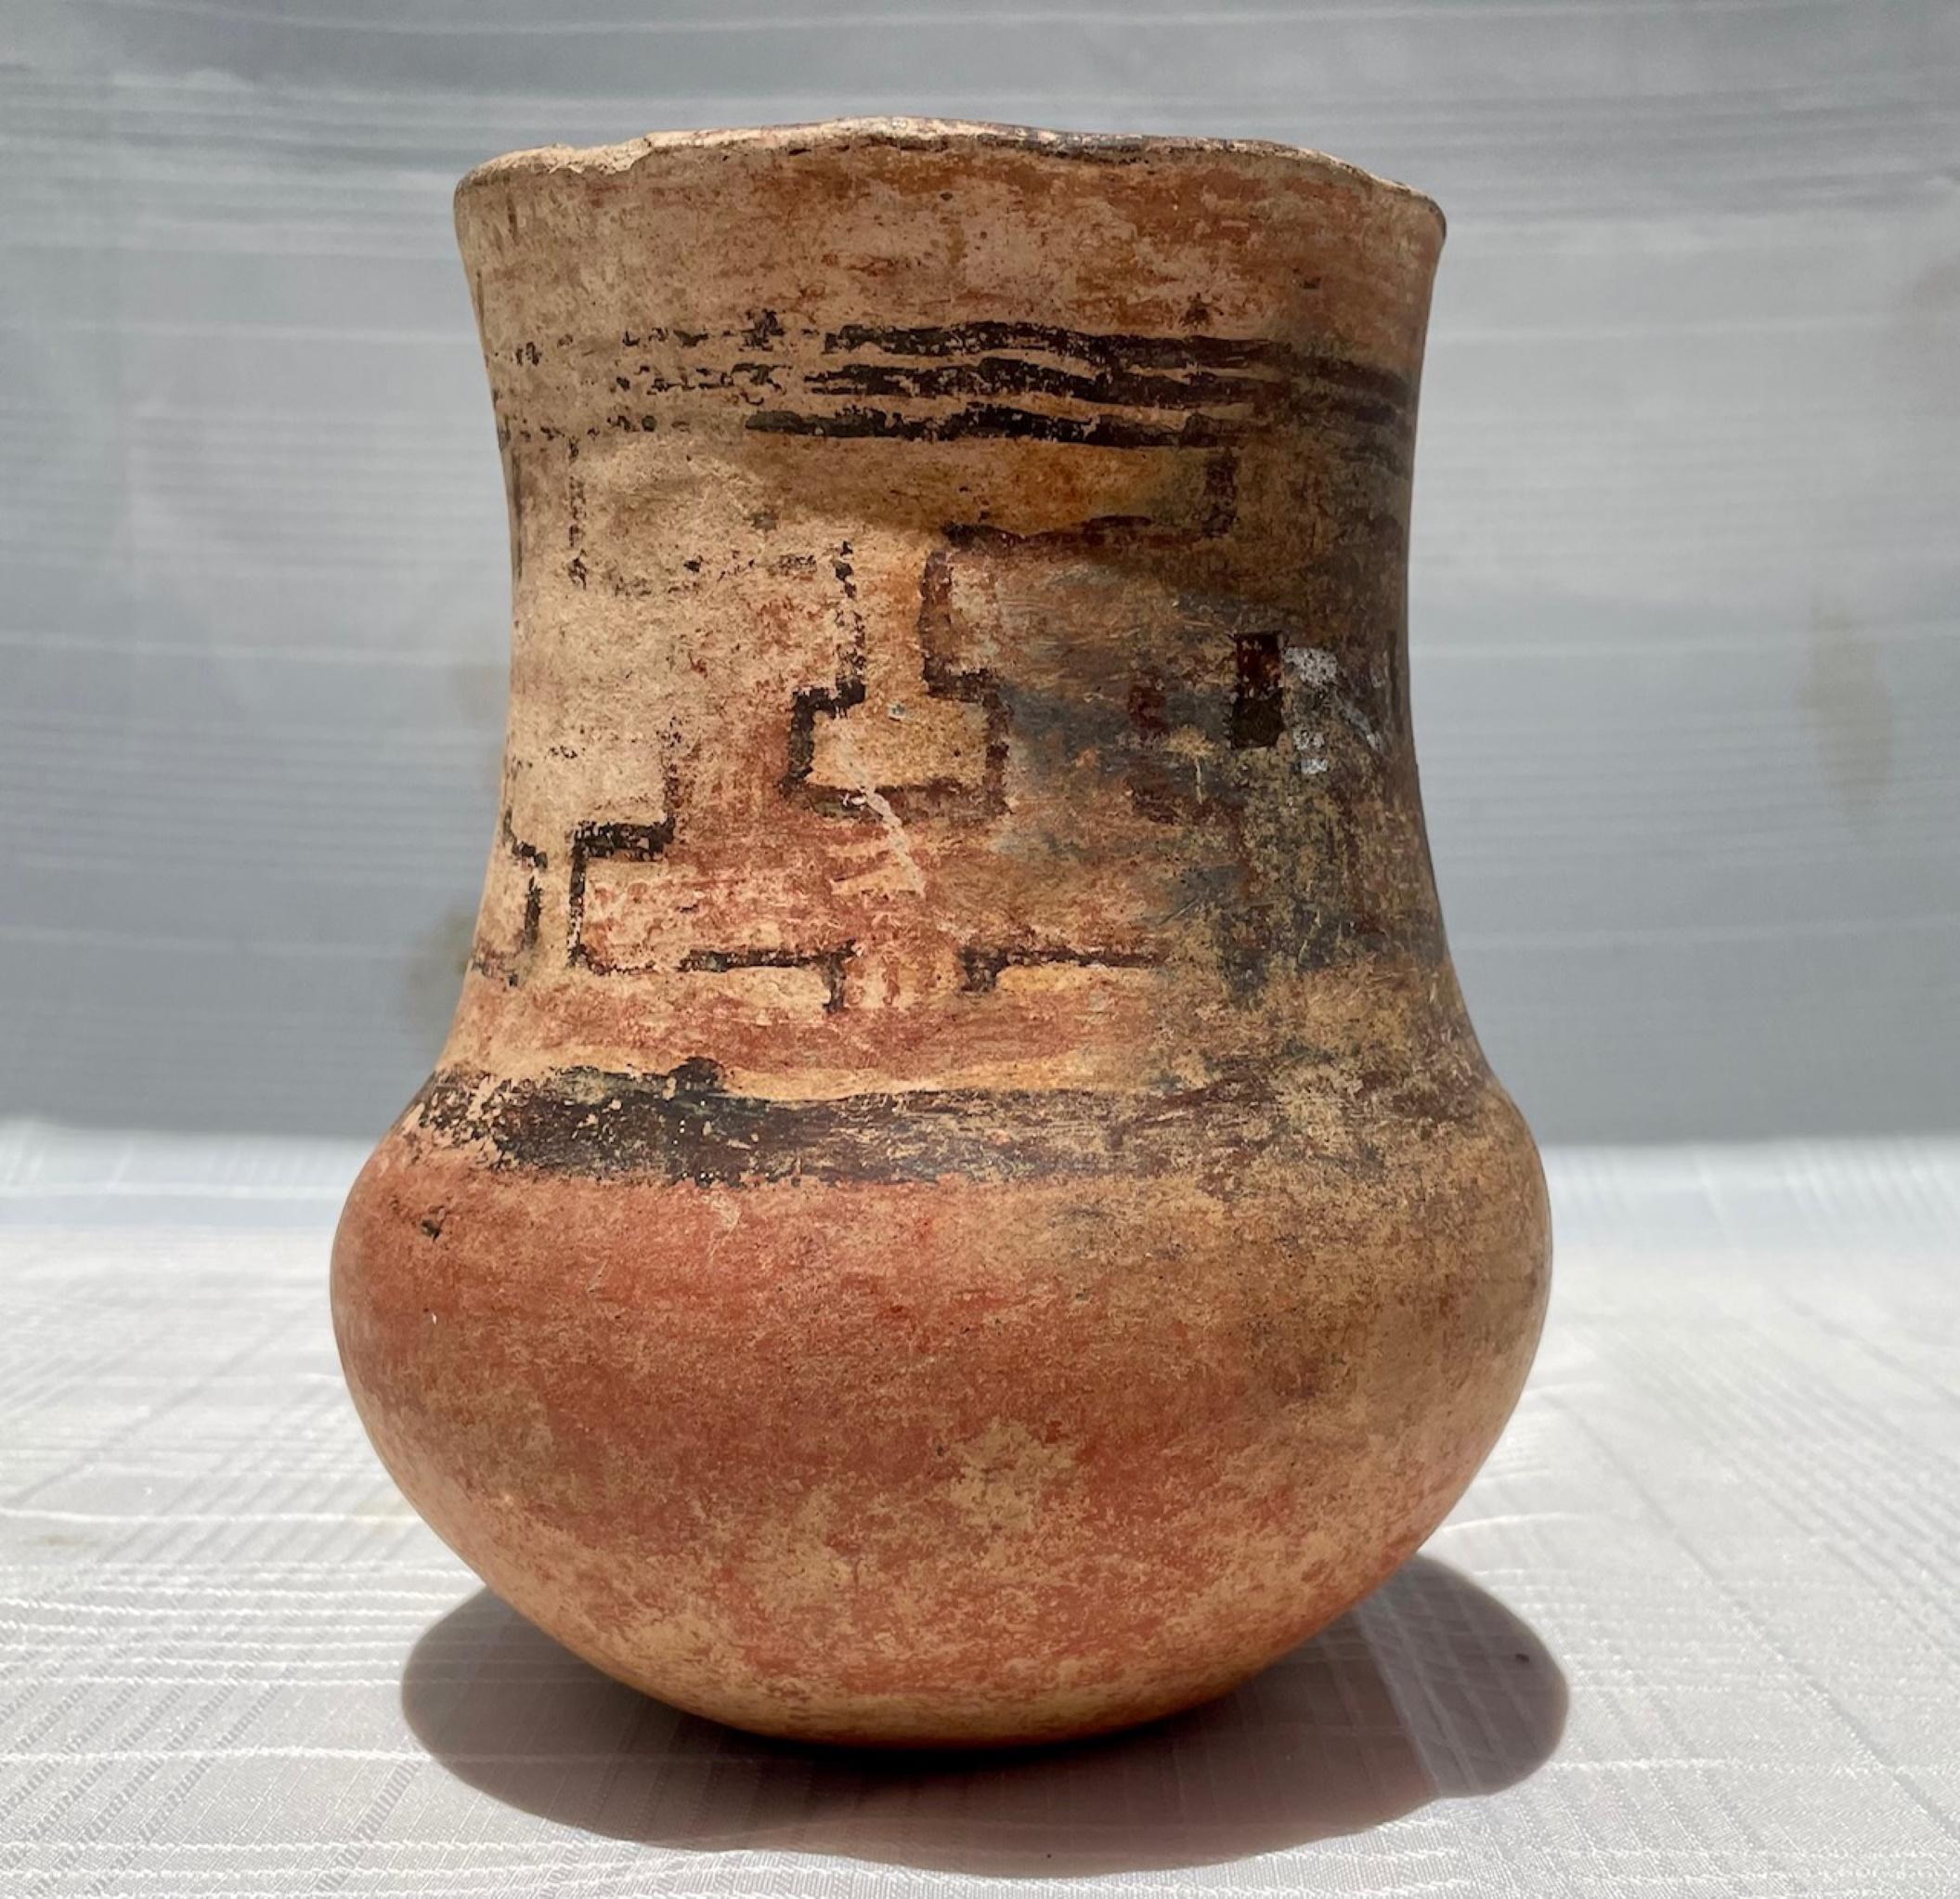 Pre-Columbian Mayan terracotta vessel with Glyphs.

A fine, well-made terra-cotta Pre-Columbian Mayan, Mexican vessel in cylindrical vase form with bulbous bottom. The beautiful thin-walled vessel stands on a flat base. Banding black glyphs